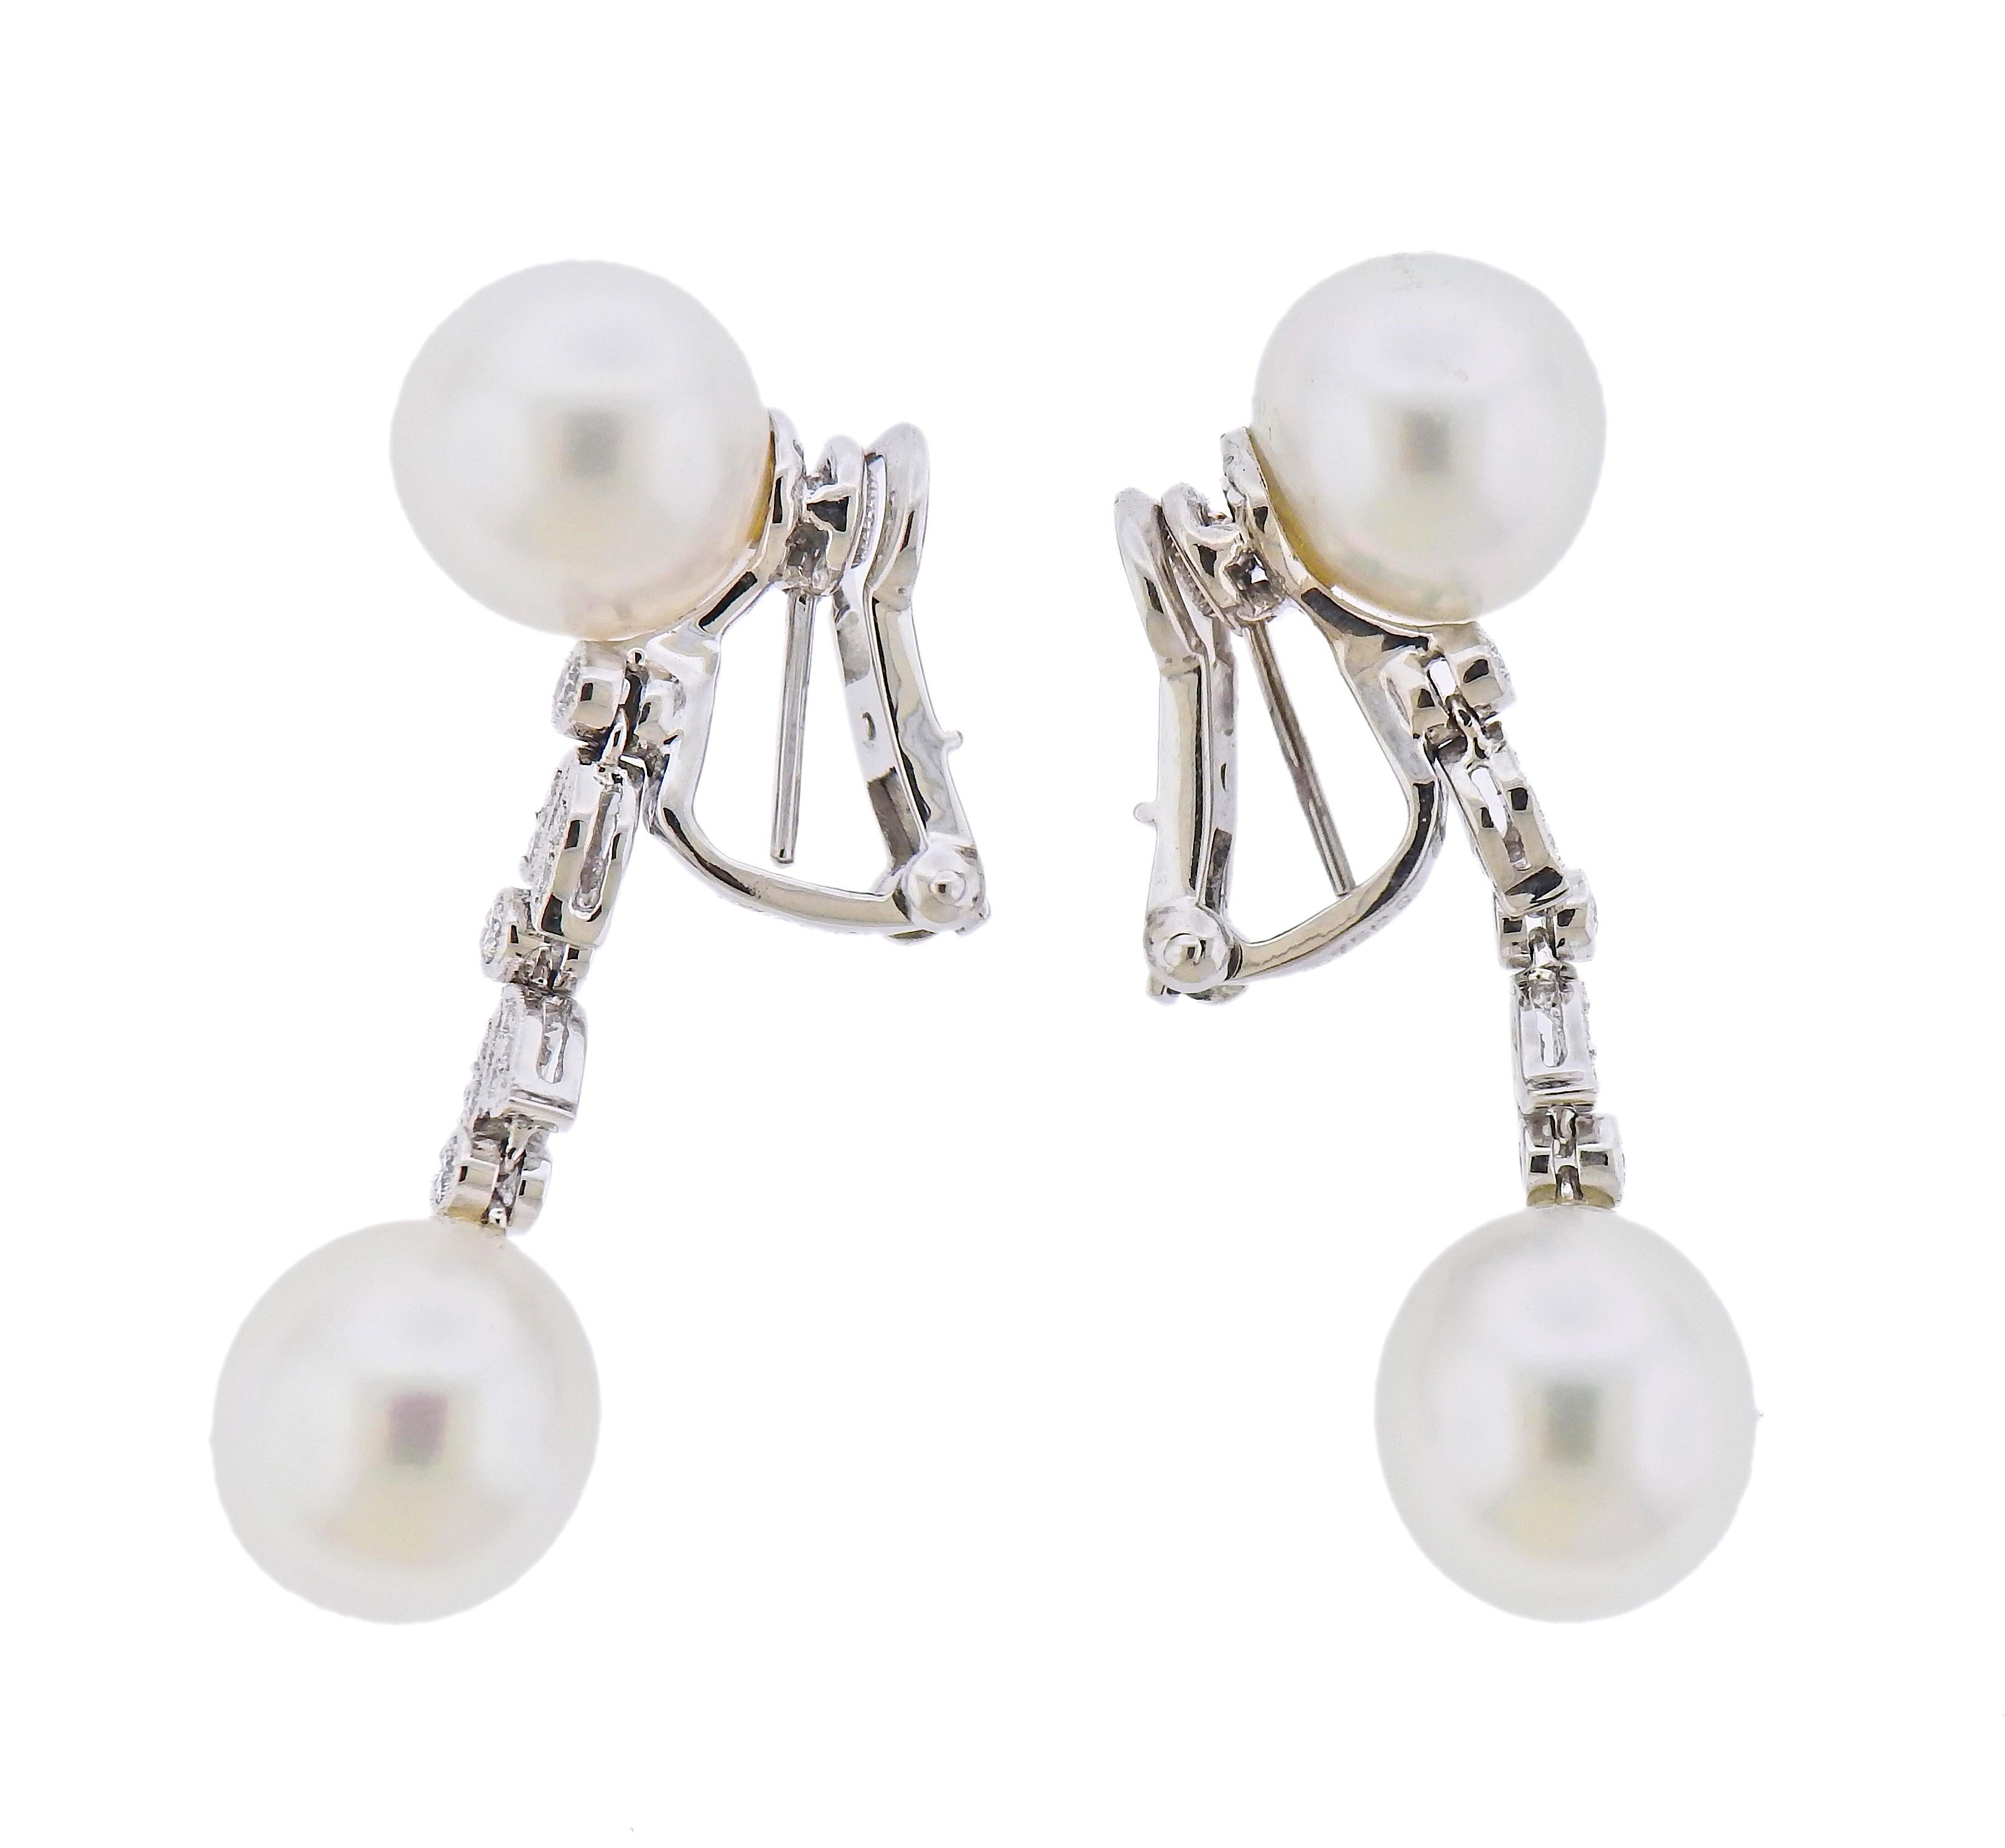 Pair of new Assael 18k gold drop earrings, with approx. 0.34tw in GH/VS diamonds and 11.1mm - 11 x 11.8mm South Sea Pearls. Retail $9500, come with pouch.  Earrings are 42mm long. Weight - 15.5 grams. Marked:  Assael, 750.